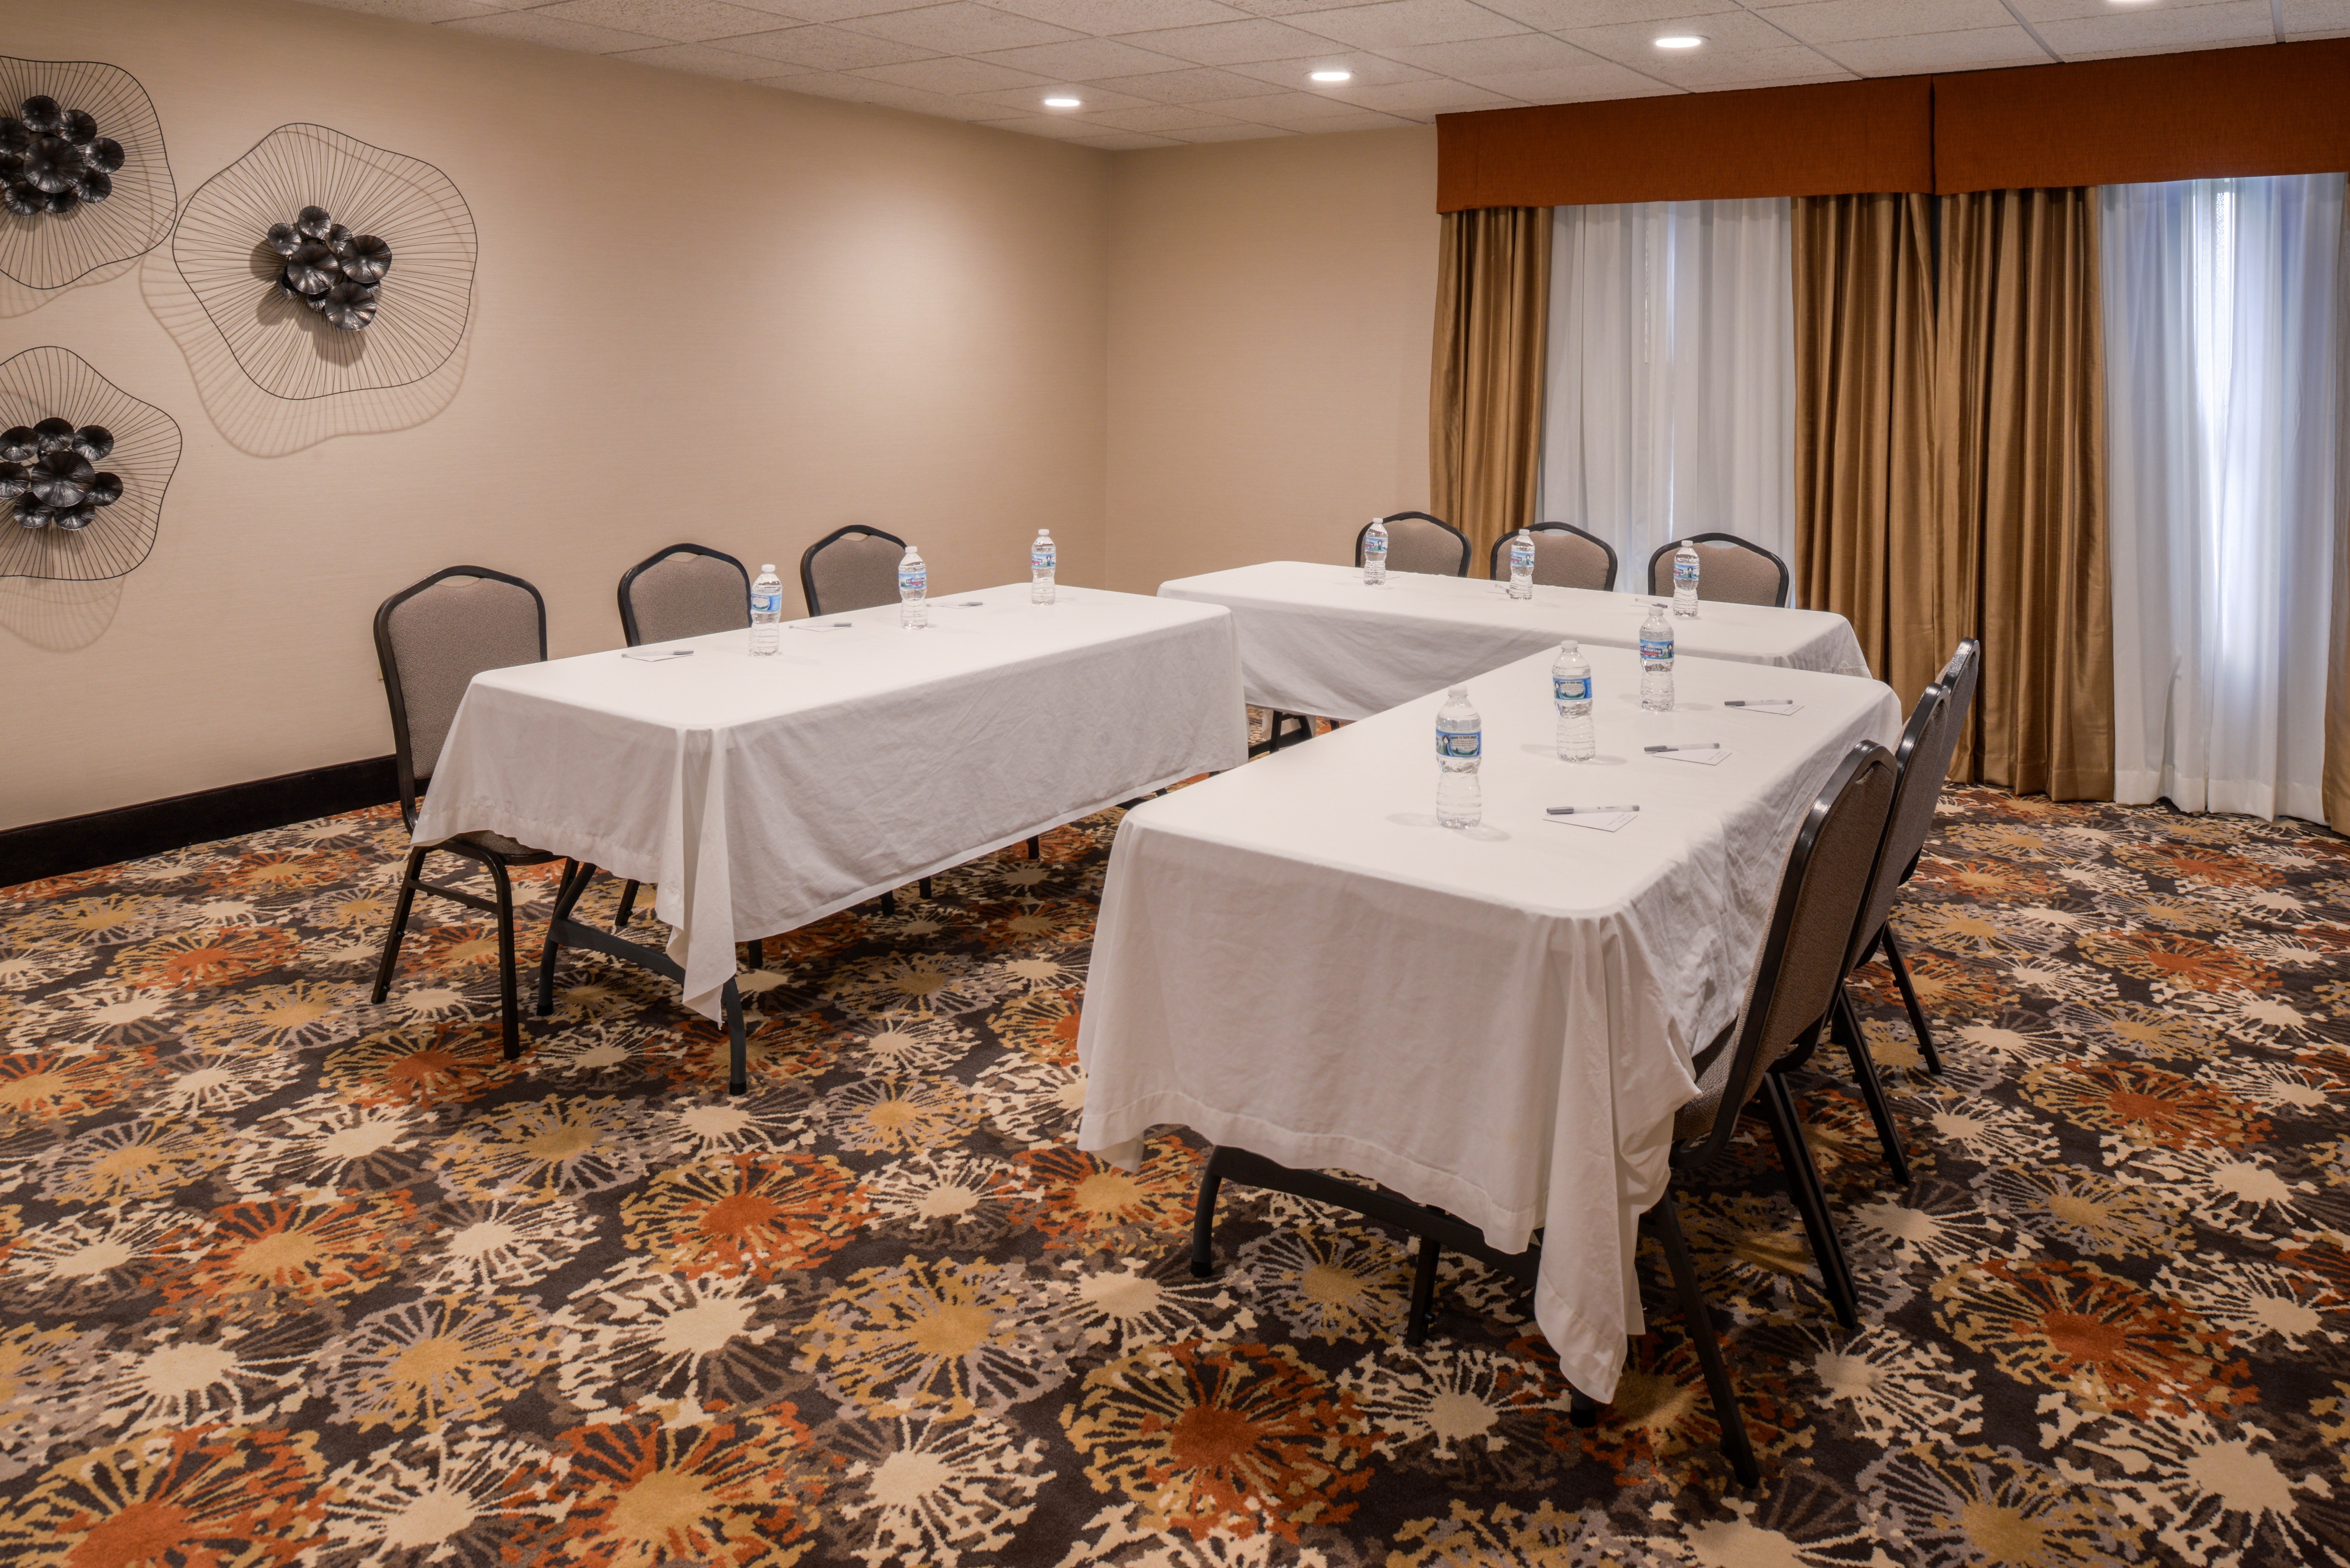 Three Left-Facing Tables with Tablecloths and Nine Chairs in Meeting Room Set Up in U-Shape